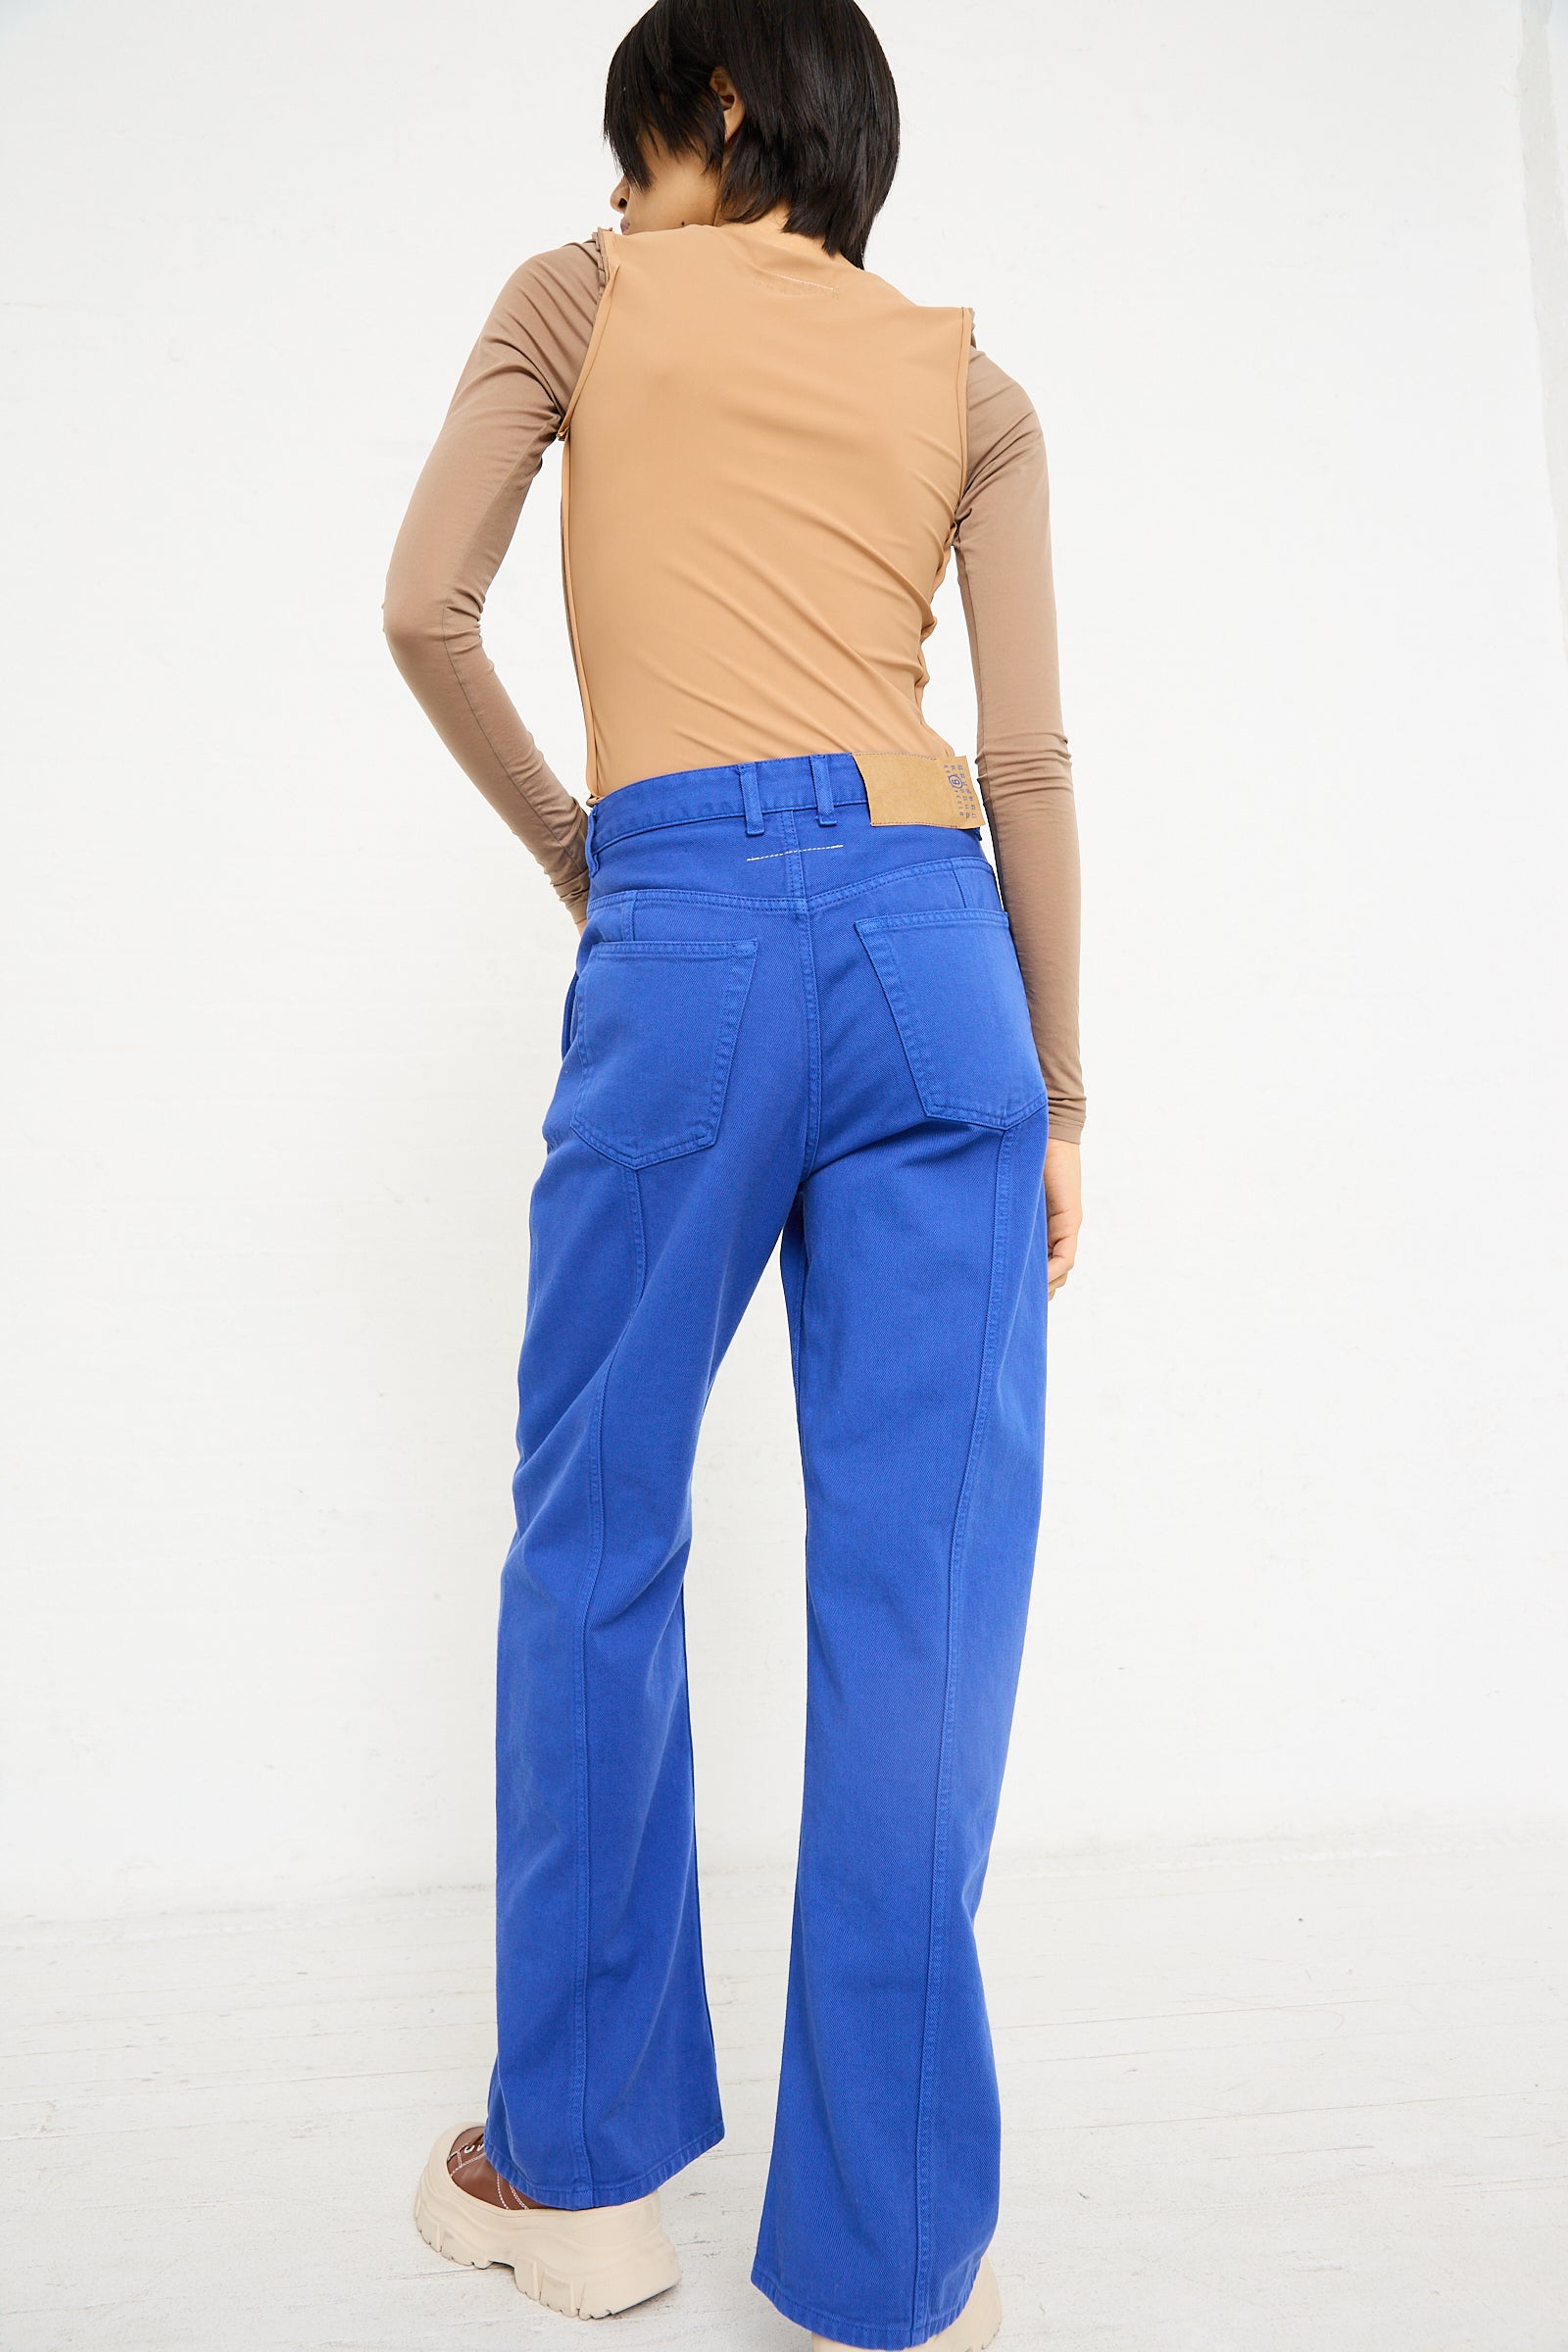 A woman from behind, wearing the 5 Pocket Pant in Blue by MM6 and a beige long-sleeve top, standing against a white wall.